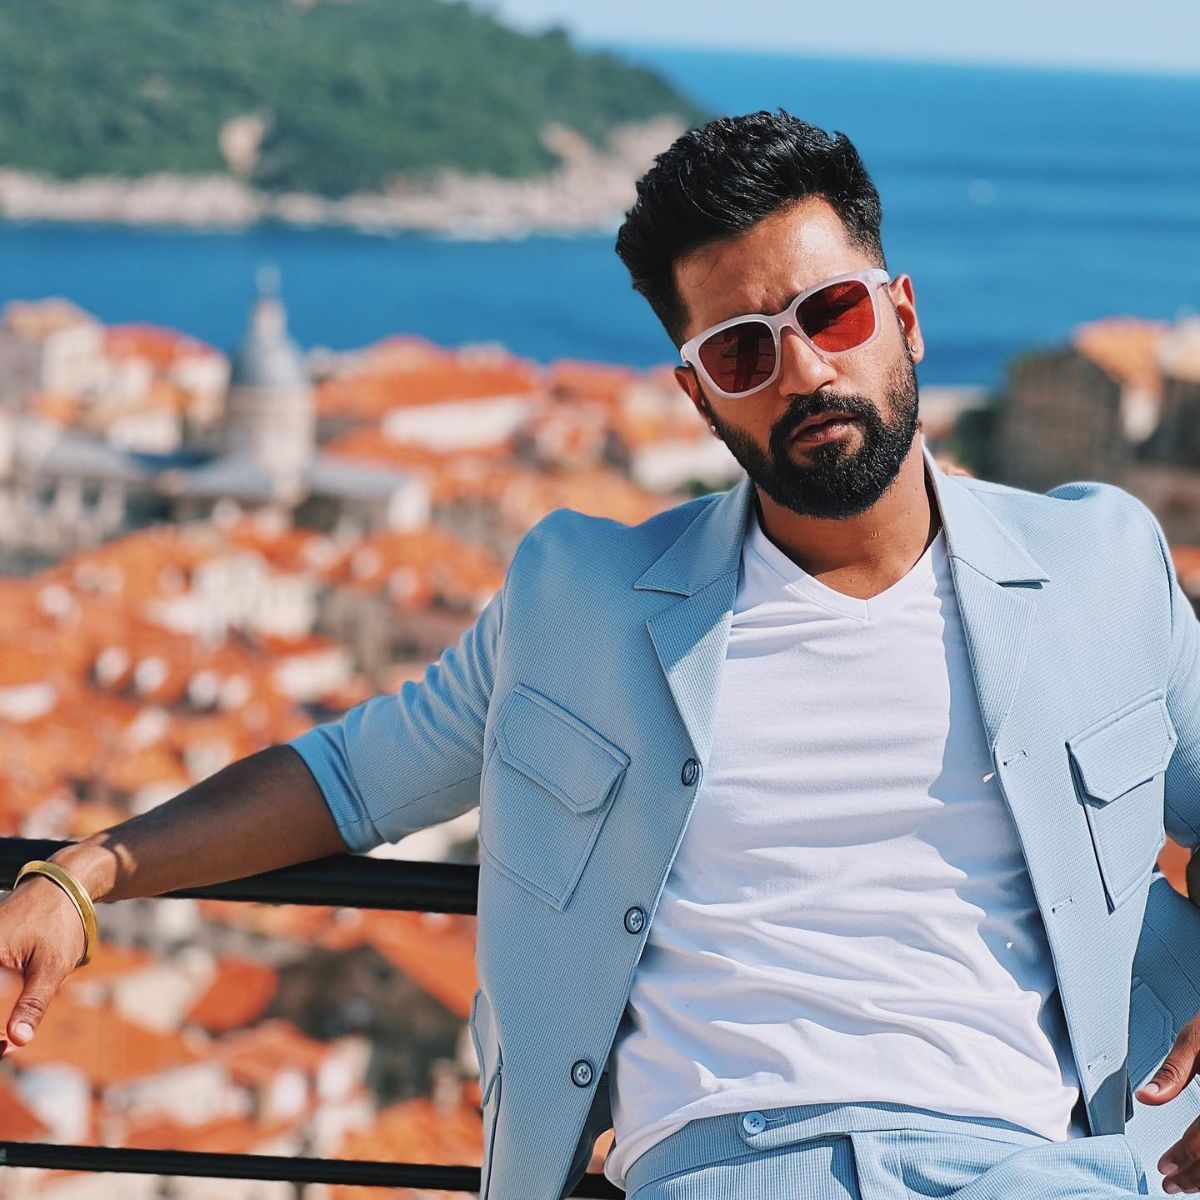 Vicky Kaushal Net Worth: What Are The Most Expensive Things He Owns?